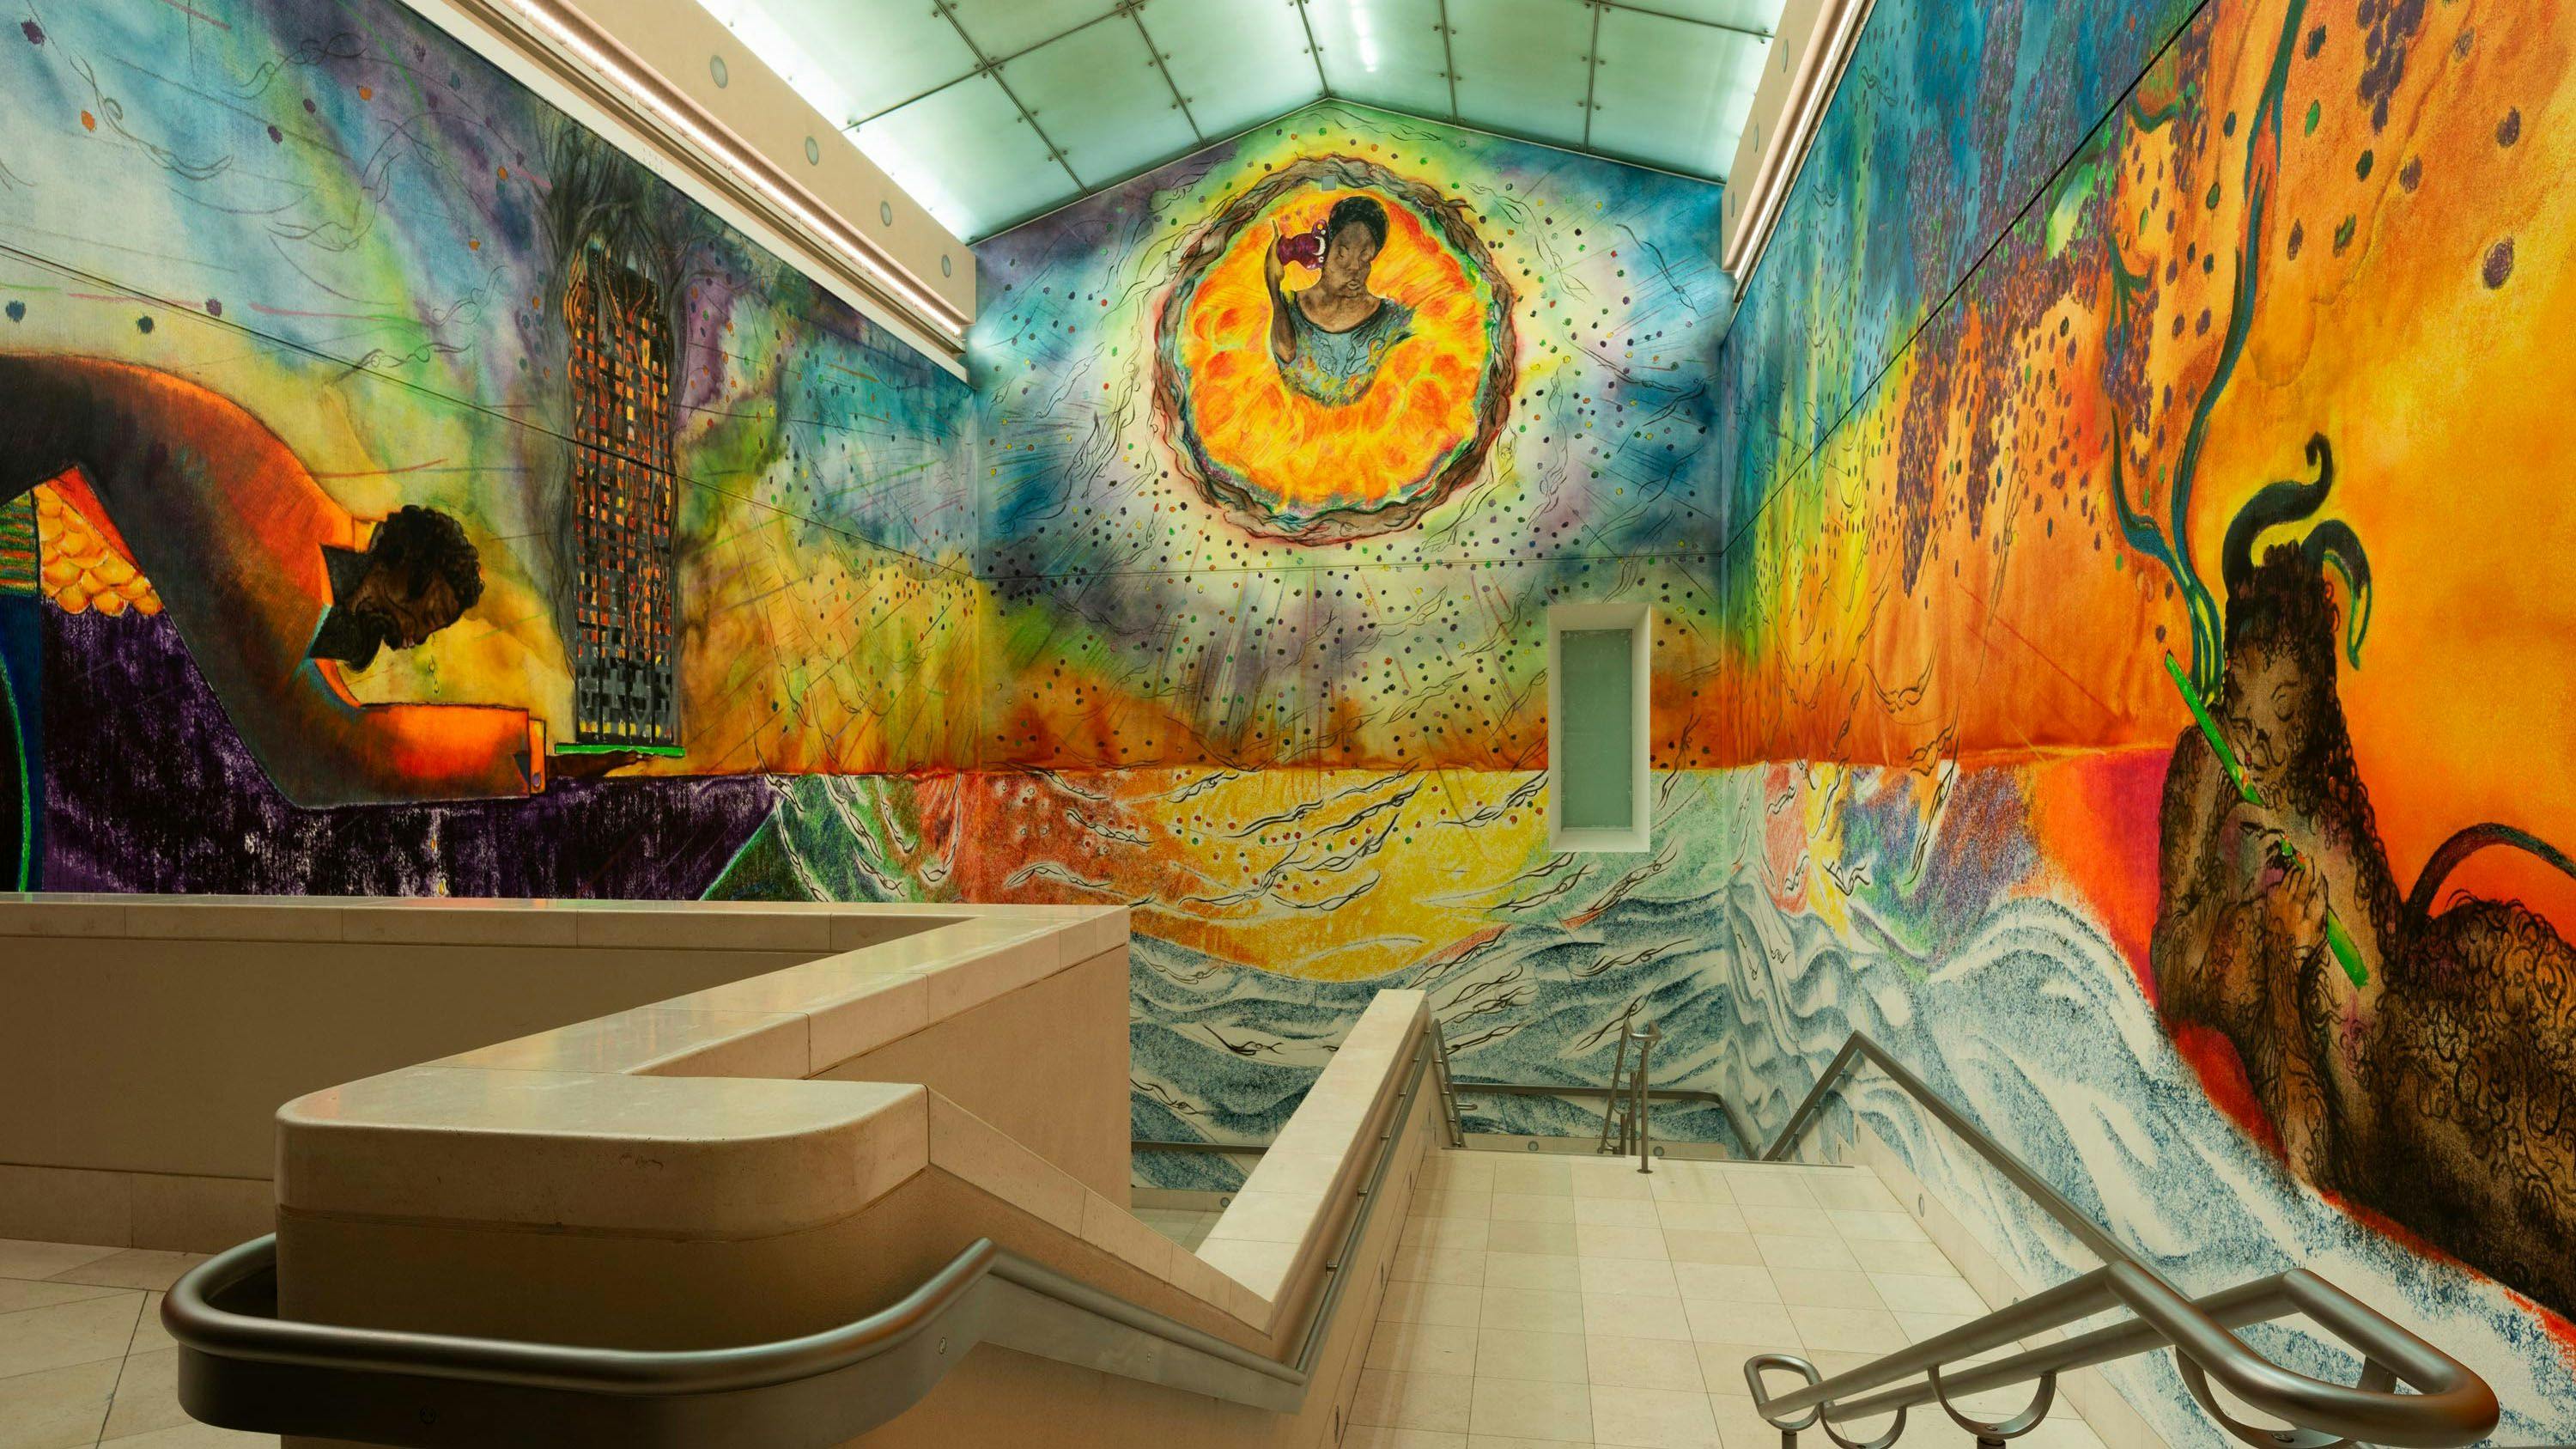 Installation view of the exhibition, Chris Ofili, Requiem, at Tate Britain’s north staircase in London, dated 2023.